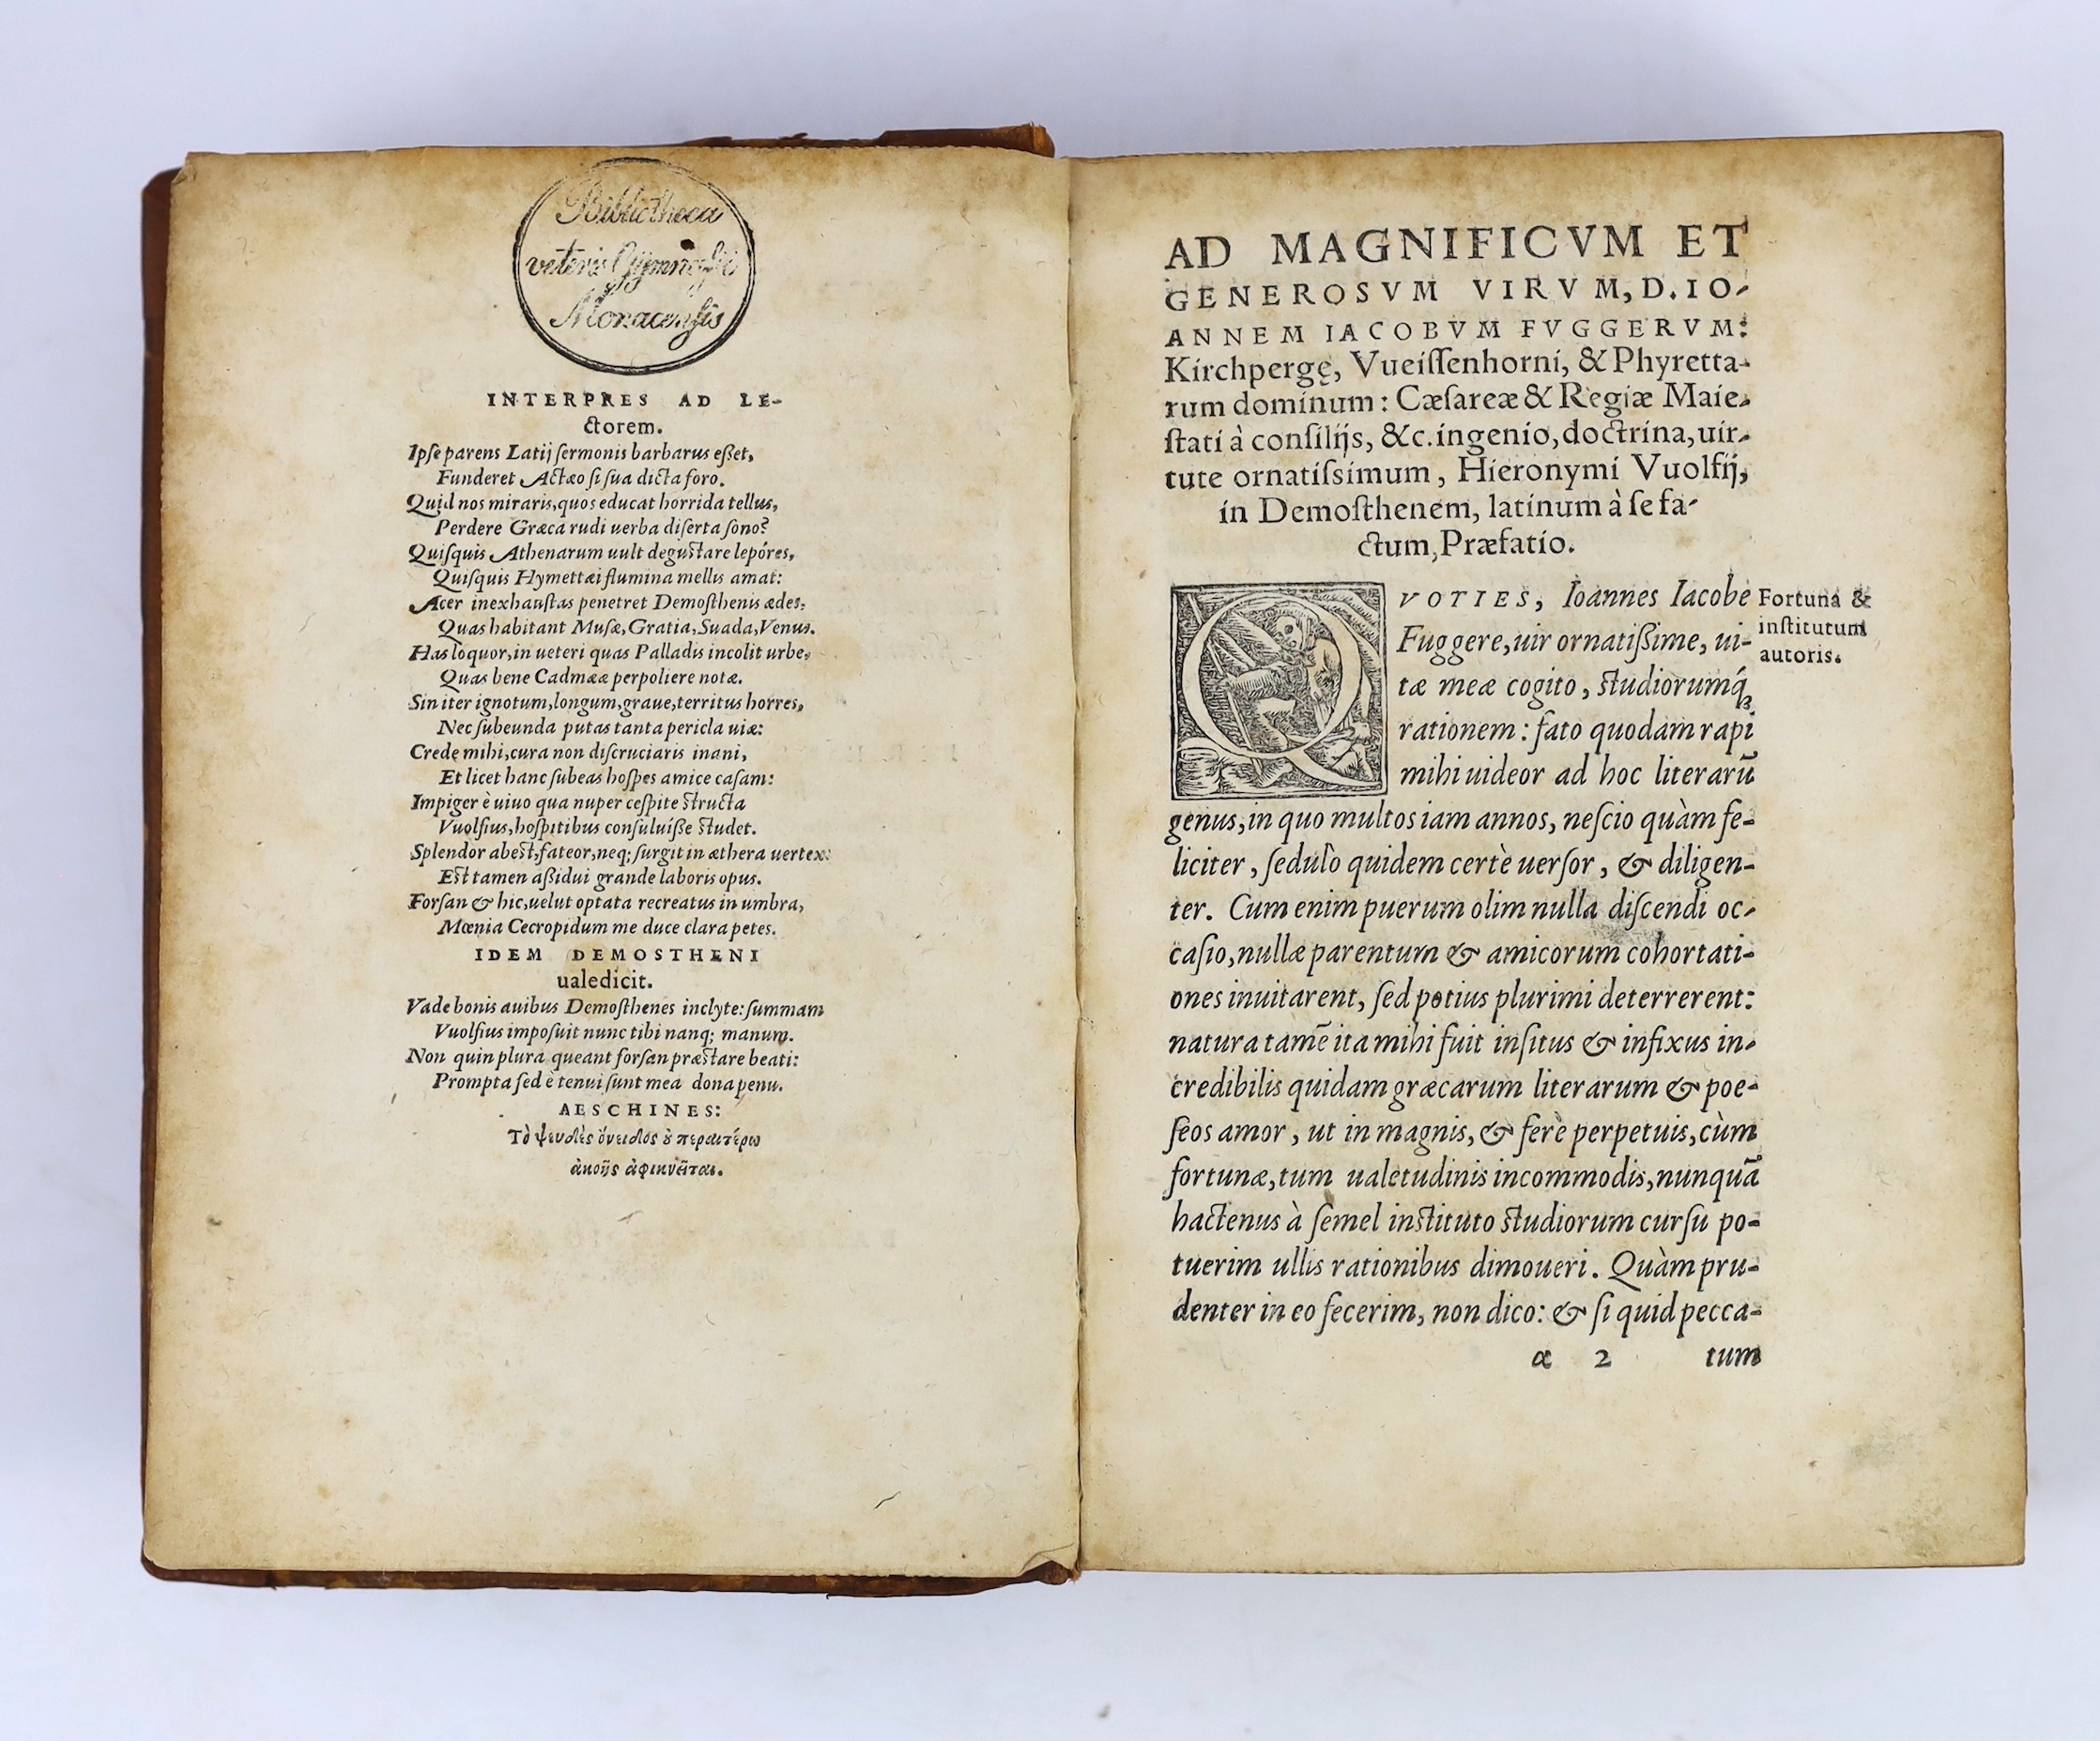 Demosthenes - Demosthenis and Aeschinis Orationes atq Epistolae....(translated by Hieronymus Wolf). vols. I and II (ex4), bound together, historiated and decorated initial letters; (48), 347pp., cols 348-513, 514-523pp.